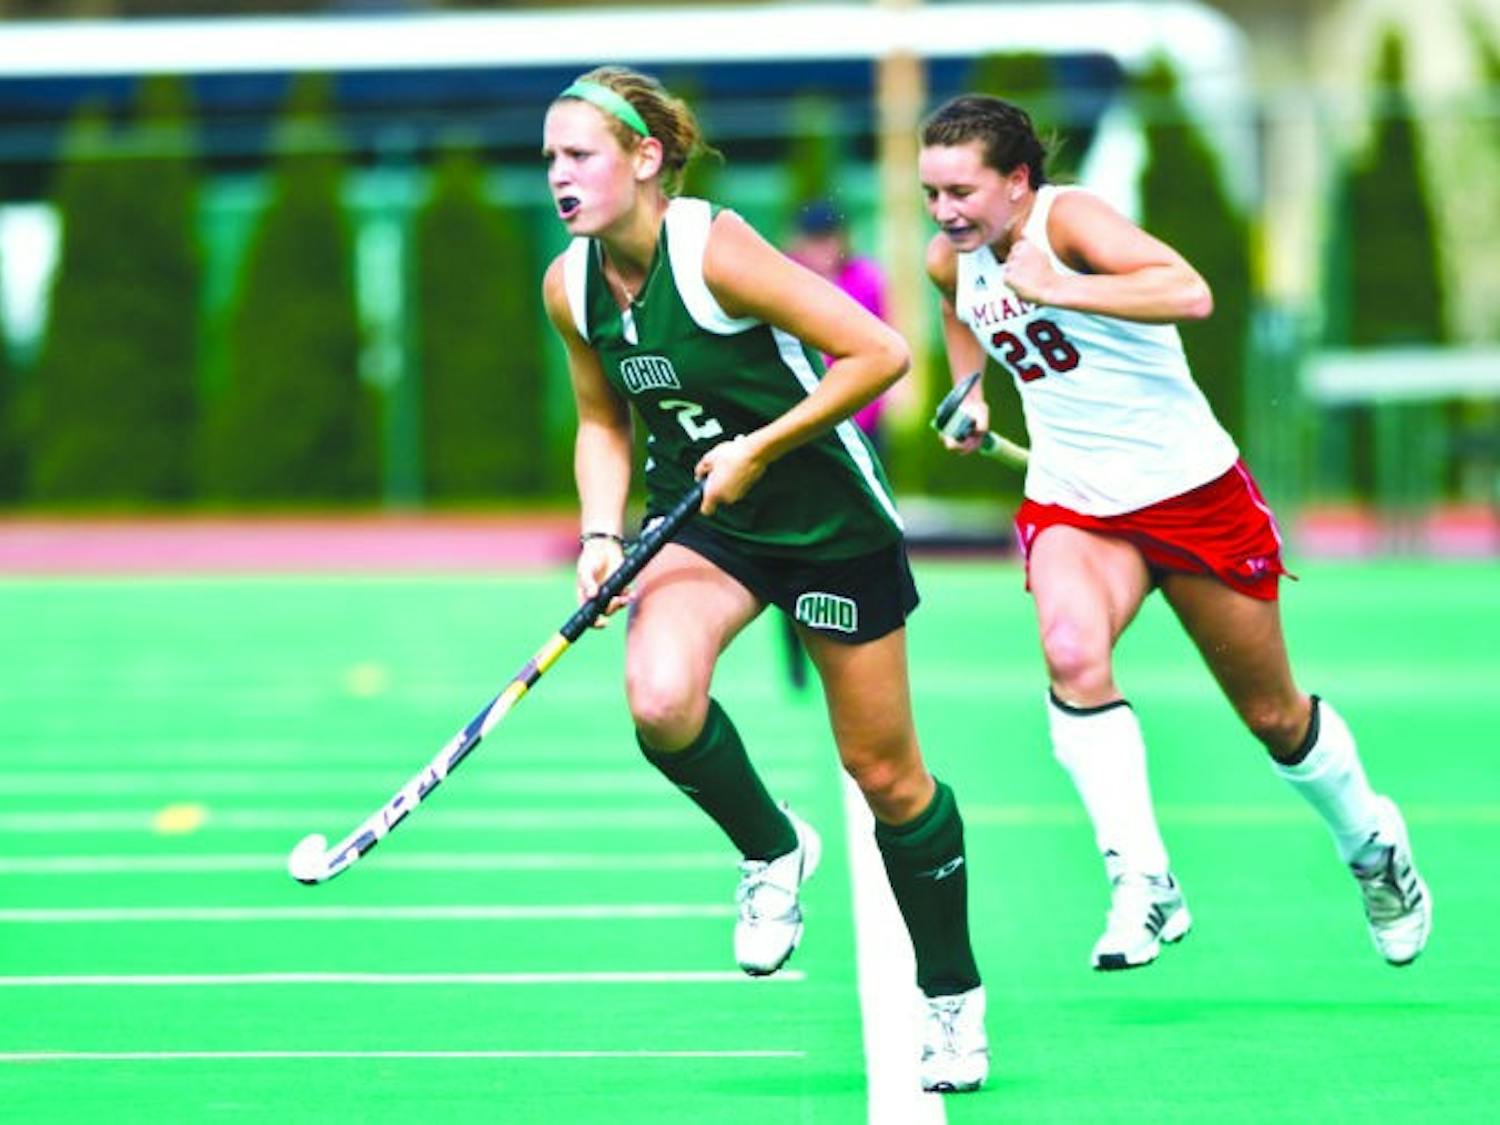 Field Hockey: Ohio takes victory after double overtime and penalty shootout  